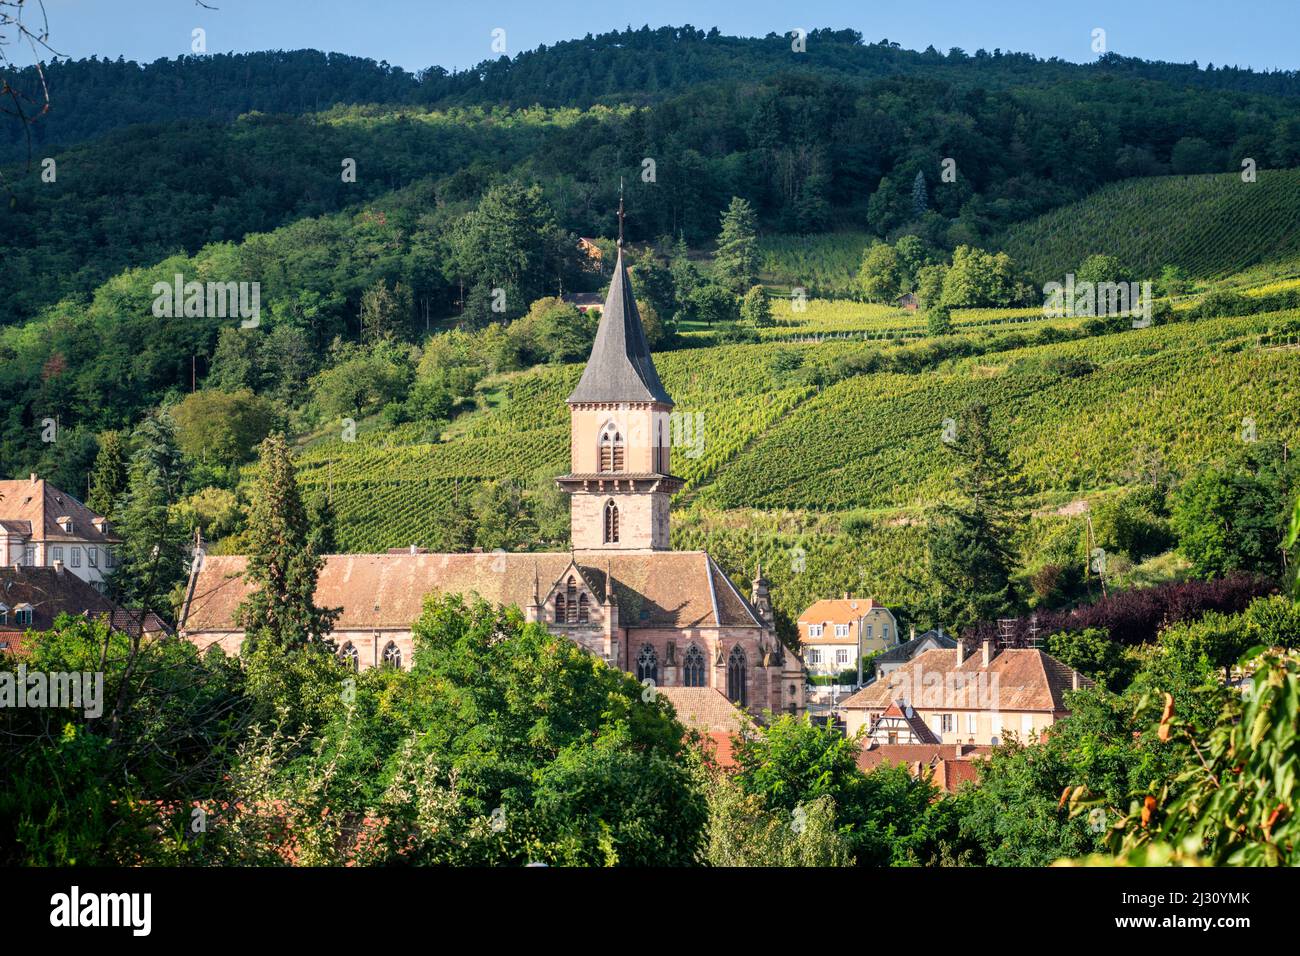 View of vineyards and the Saint Grégoire church in Ribeauville, Alsace, France, Europe Ribeauville, Haut-Rhin department, Grand Est region, Elsaessische Weinstrasse, Alsace, France Stock Photo